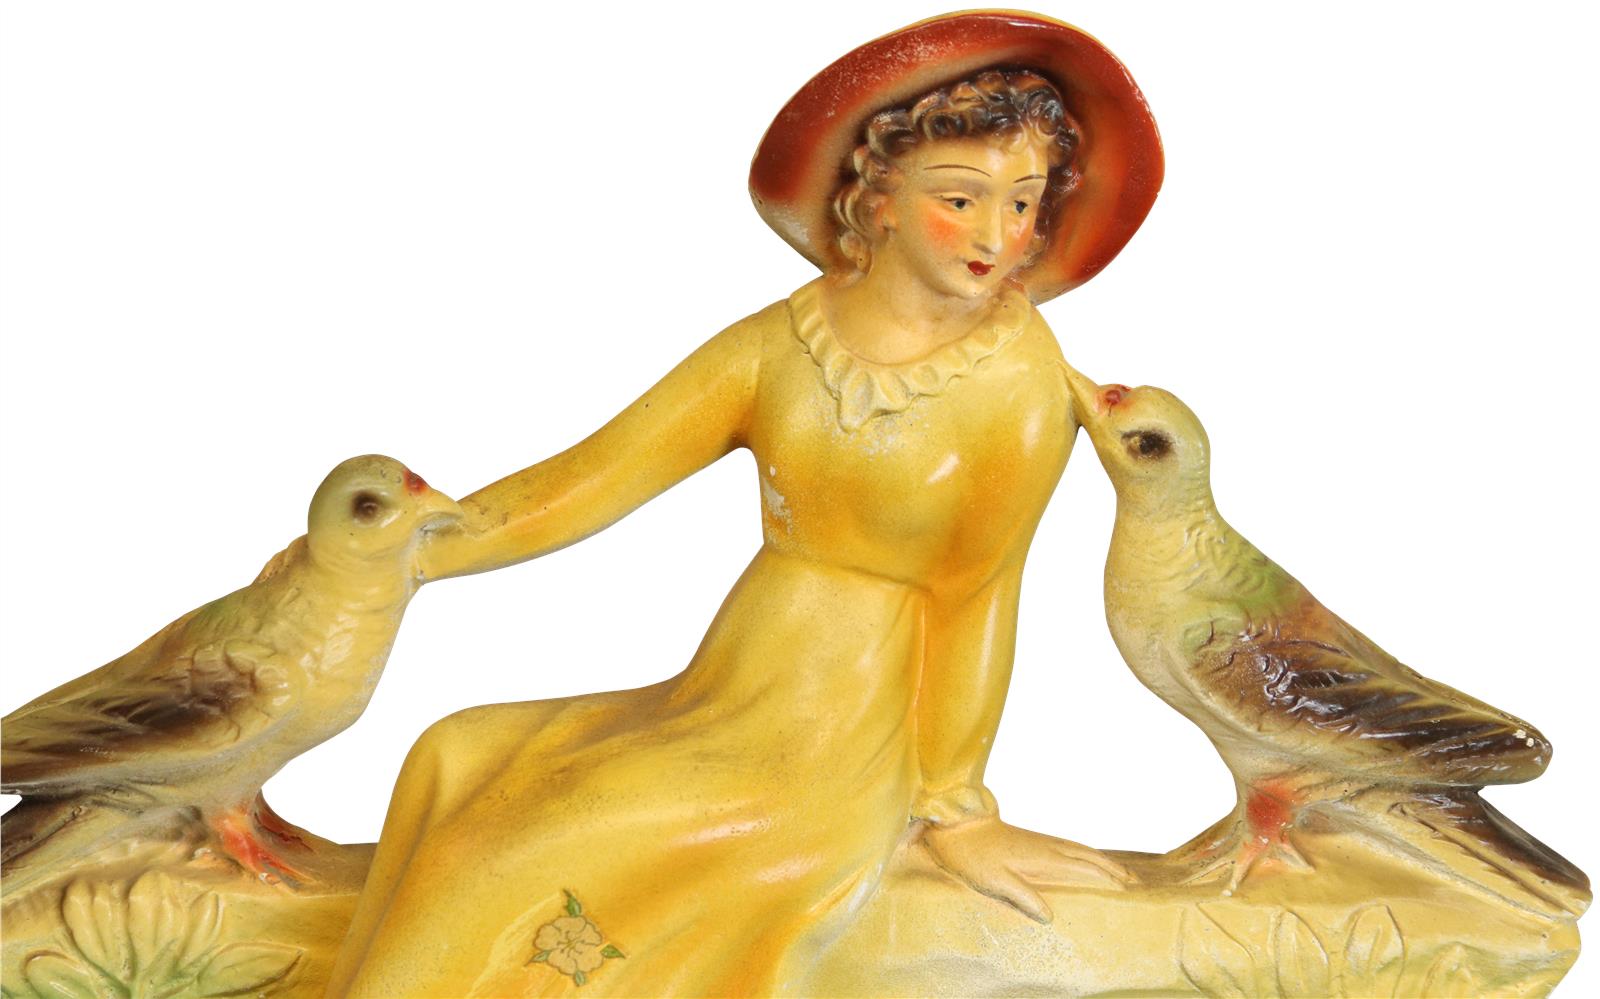 Colorful Antique Art Deco Chalkware Sculpture of Lady with Birds and Pair of Vases-Image 3